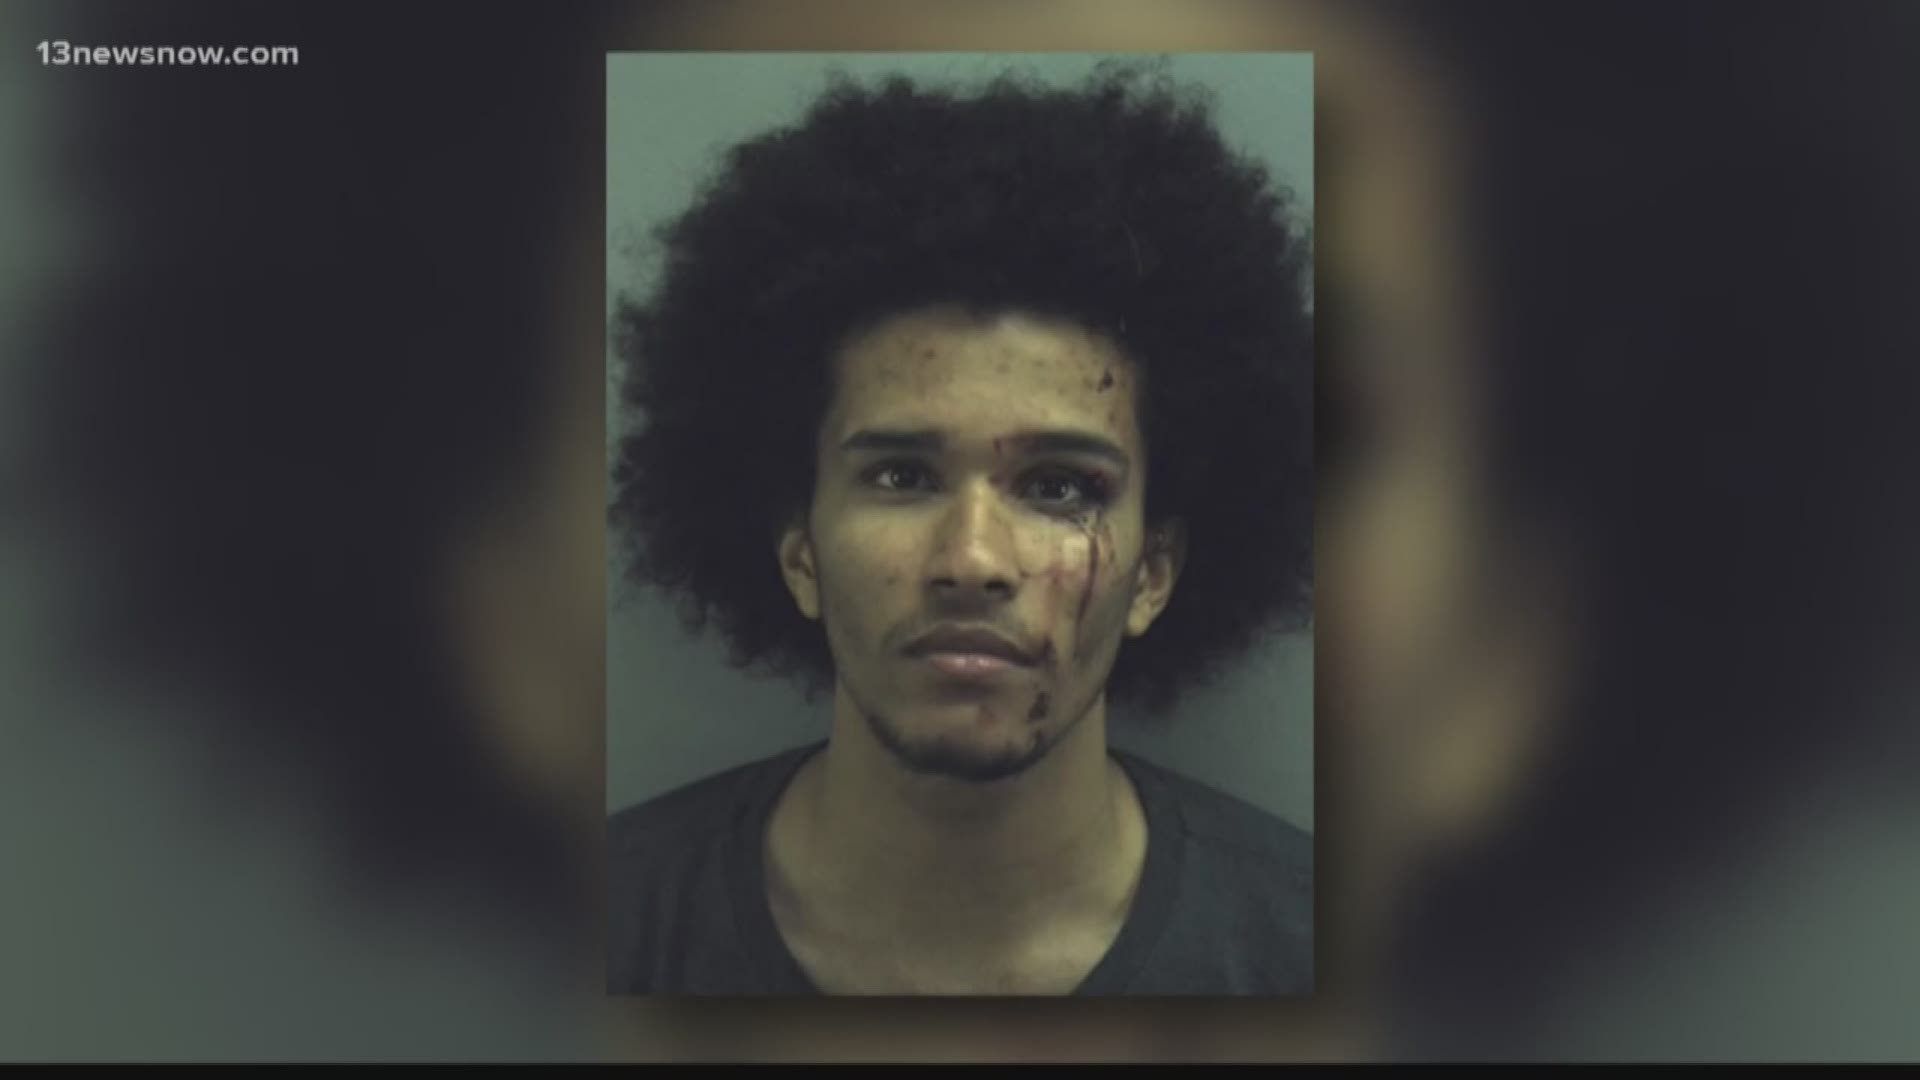 A 20-year-old man is being charged with attempted murder after causing a three-car crash in Virginia Beach.